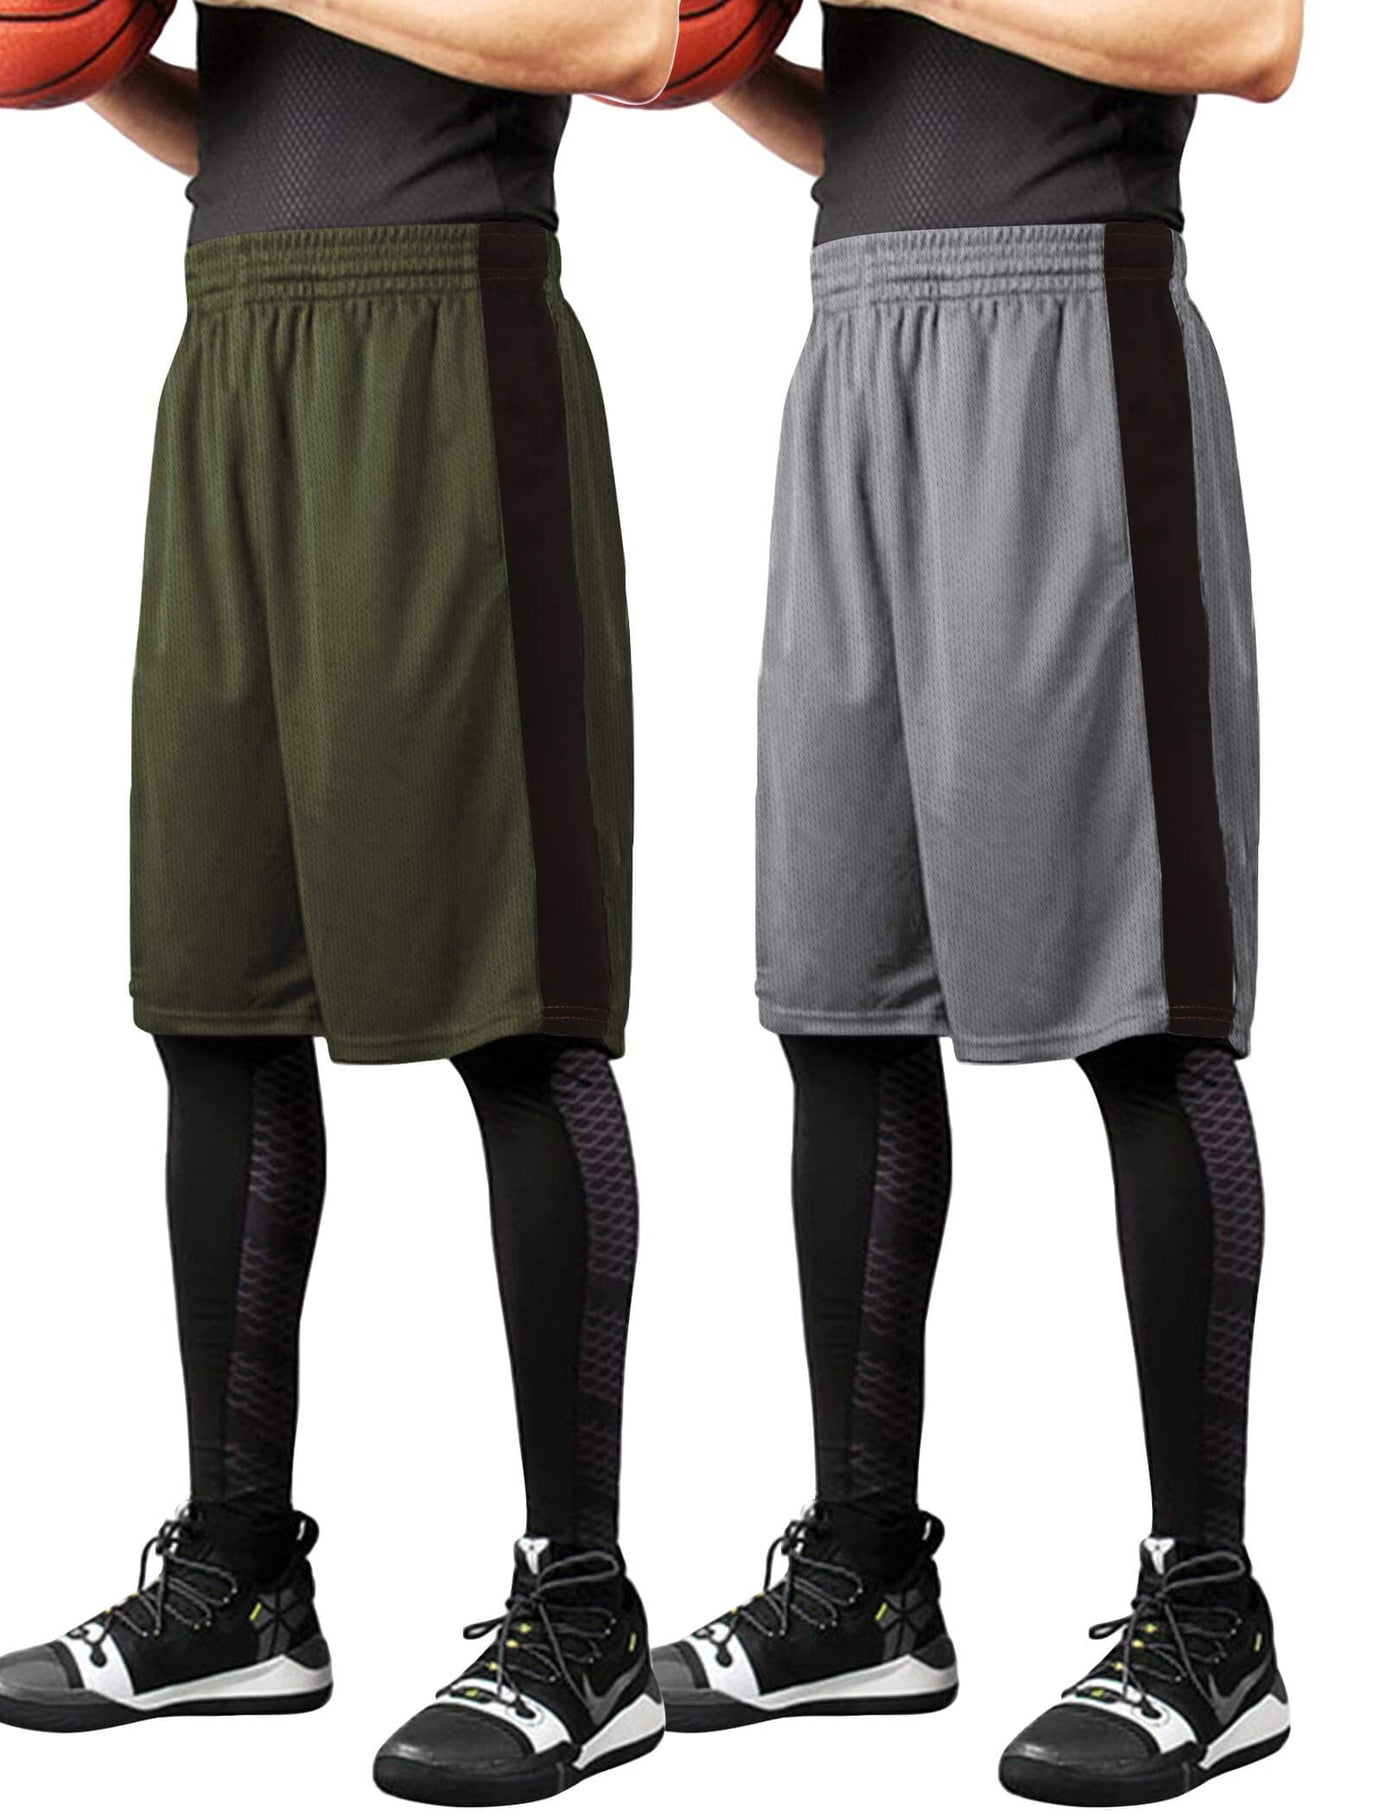 Coofandy 2-Pack Basketball Shorts (US Only) Pants coofandy Army Green/Dark Grey S 